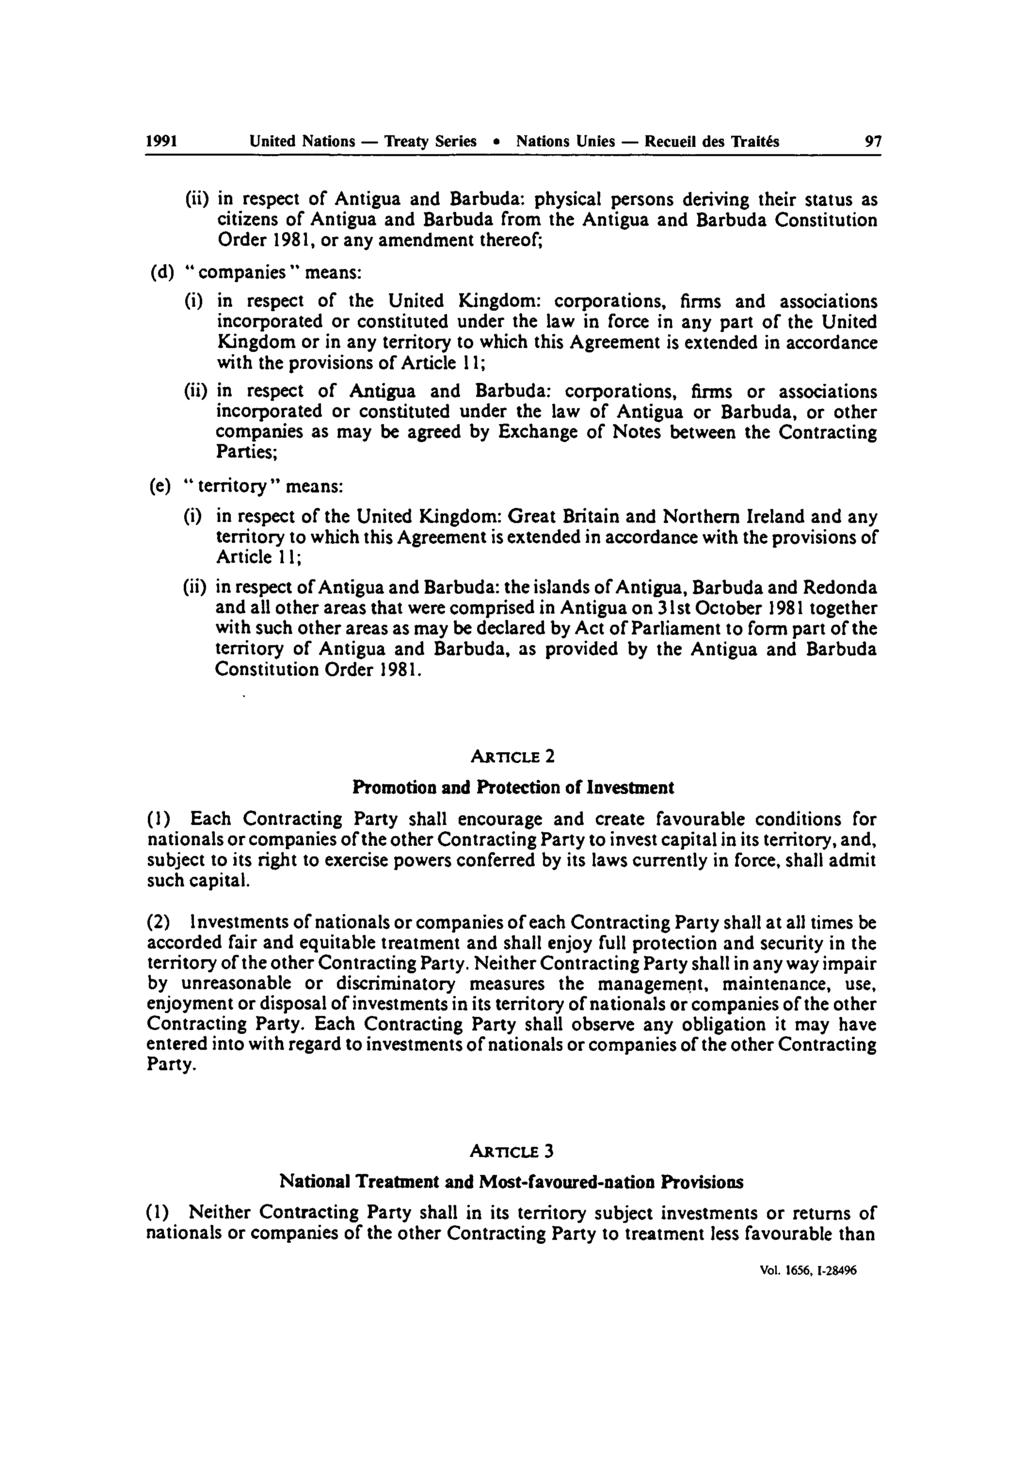 1991 United Nations - Treaty Series * Nations Unies - Recuell des Traitis 97 (ii) in respect of Antigua and Barbuda: physical persons deriving their status as citizens of Antigua and Barbuda from the